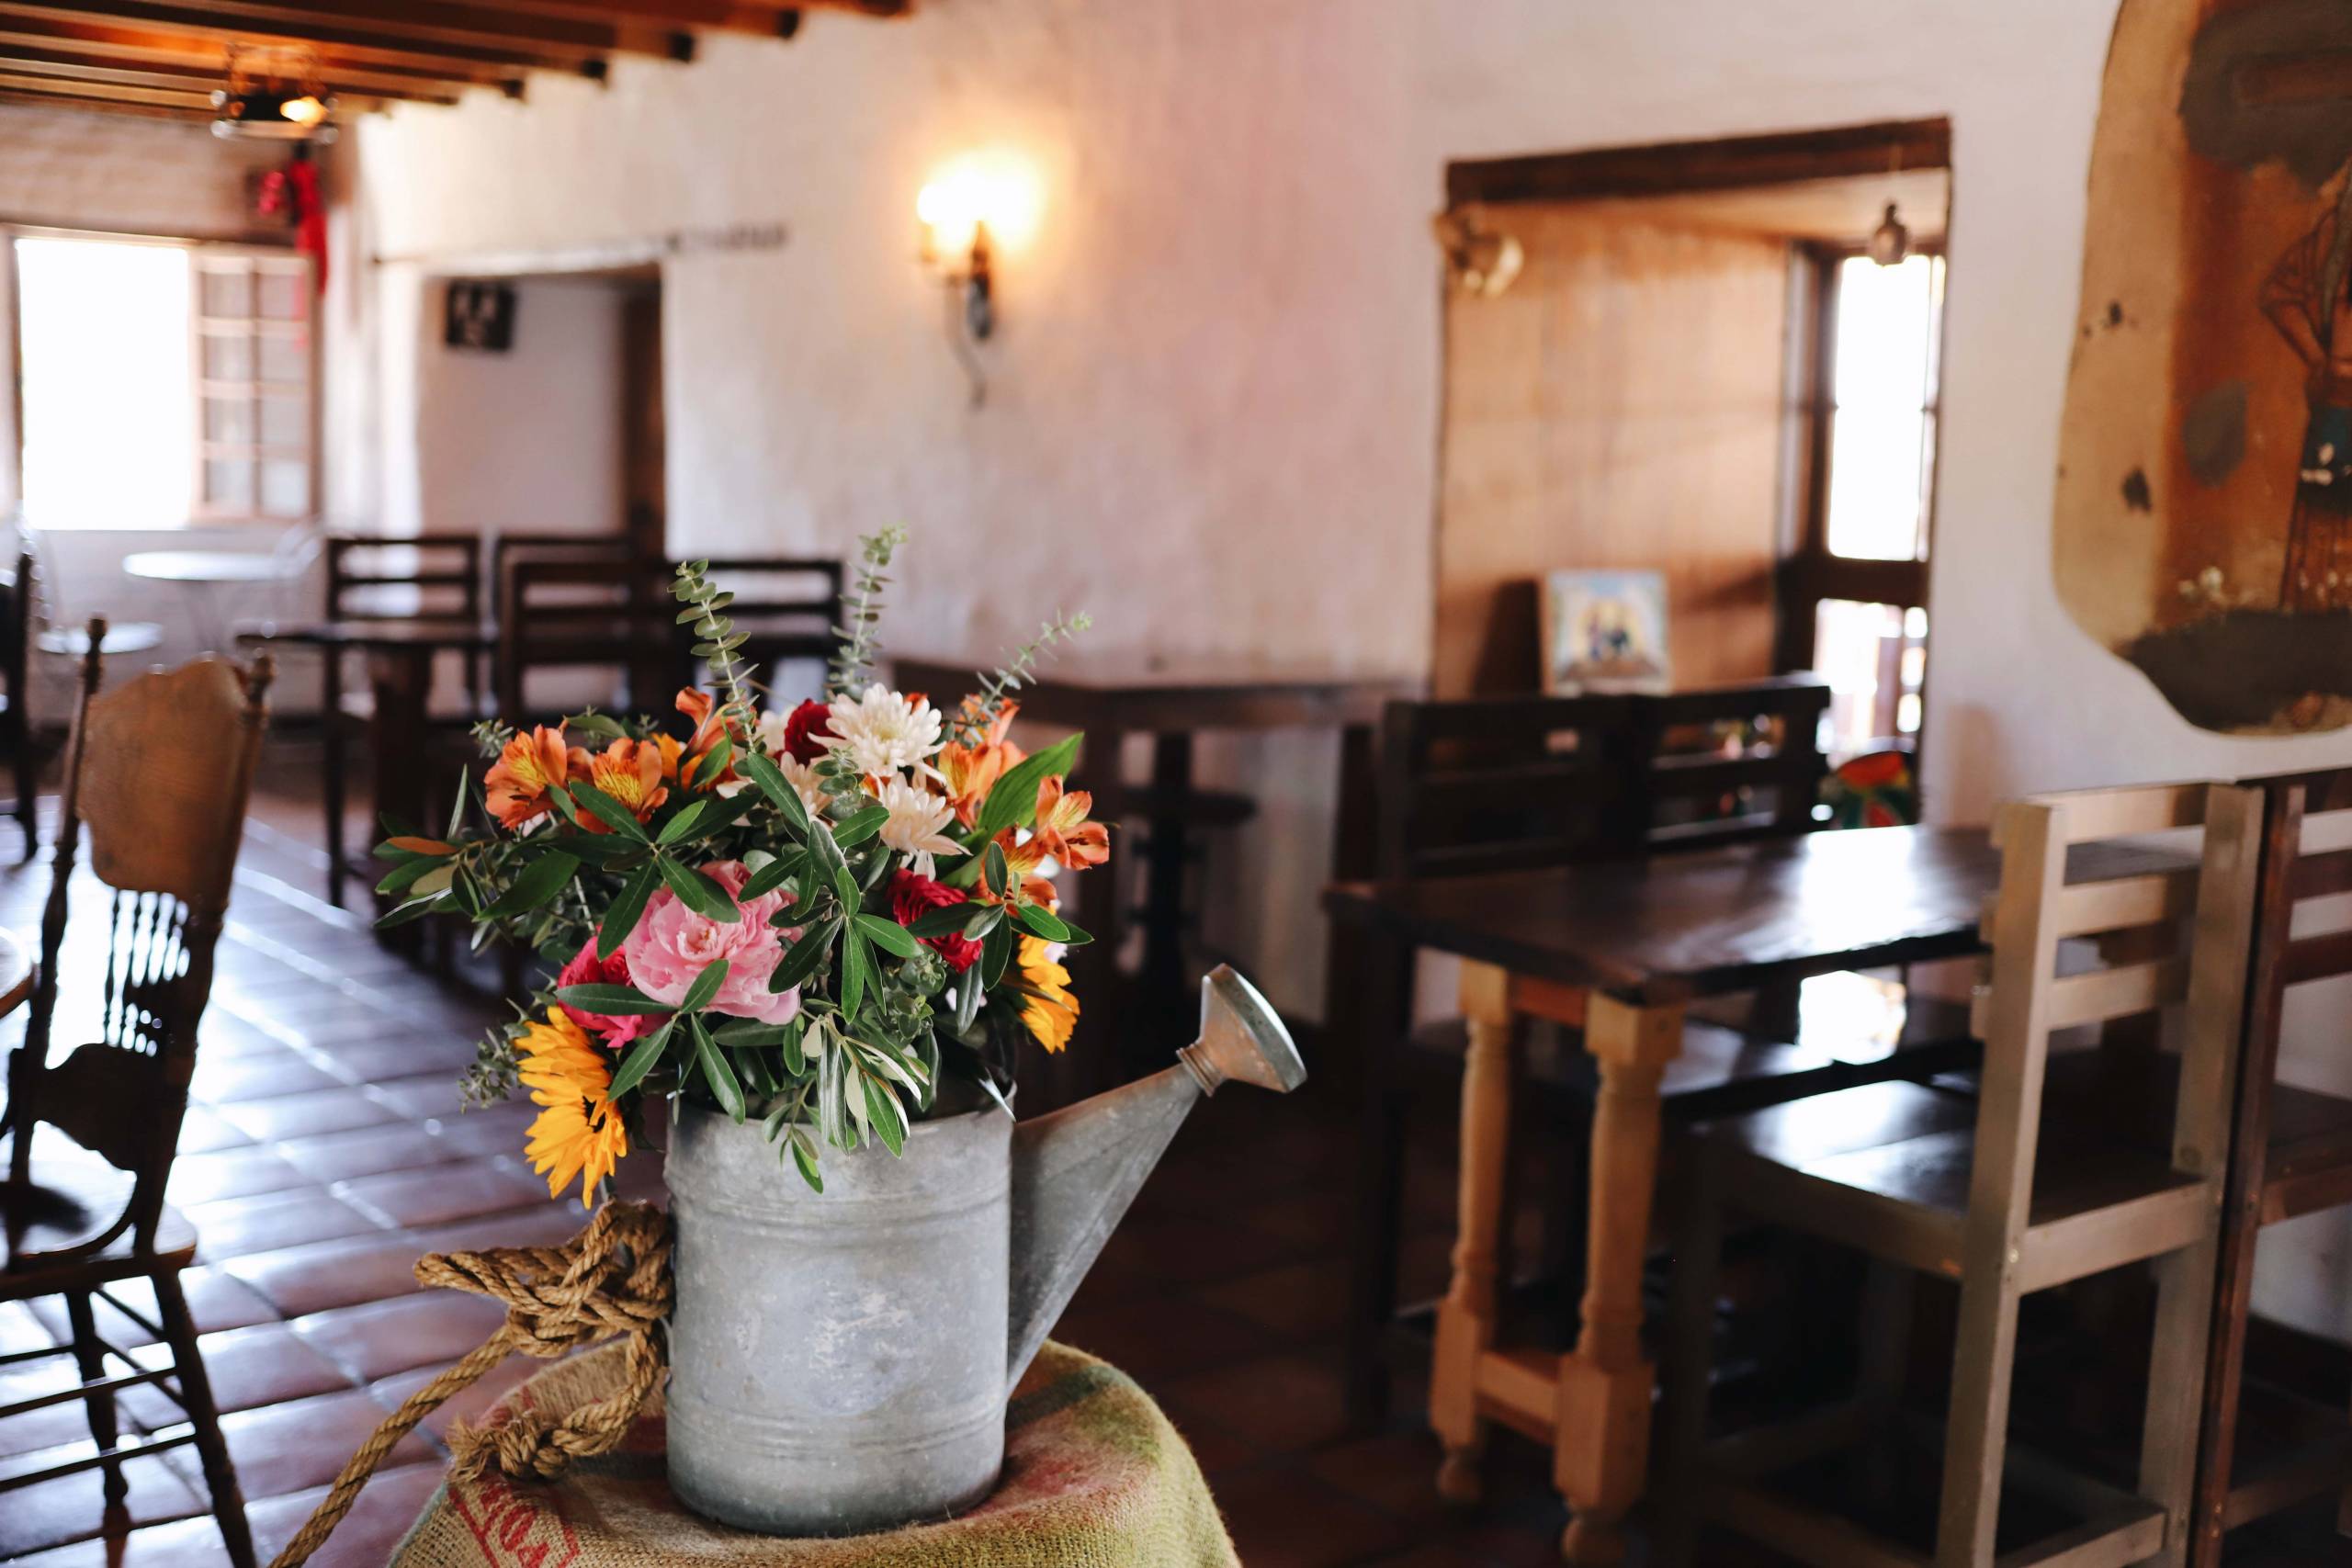 The dining room at La Cheve, with the old adobo walls and a bunch of flowers in a watering can.